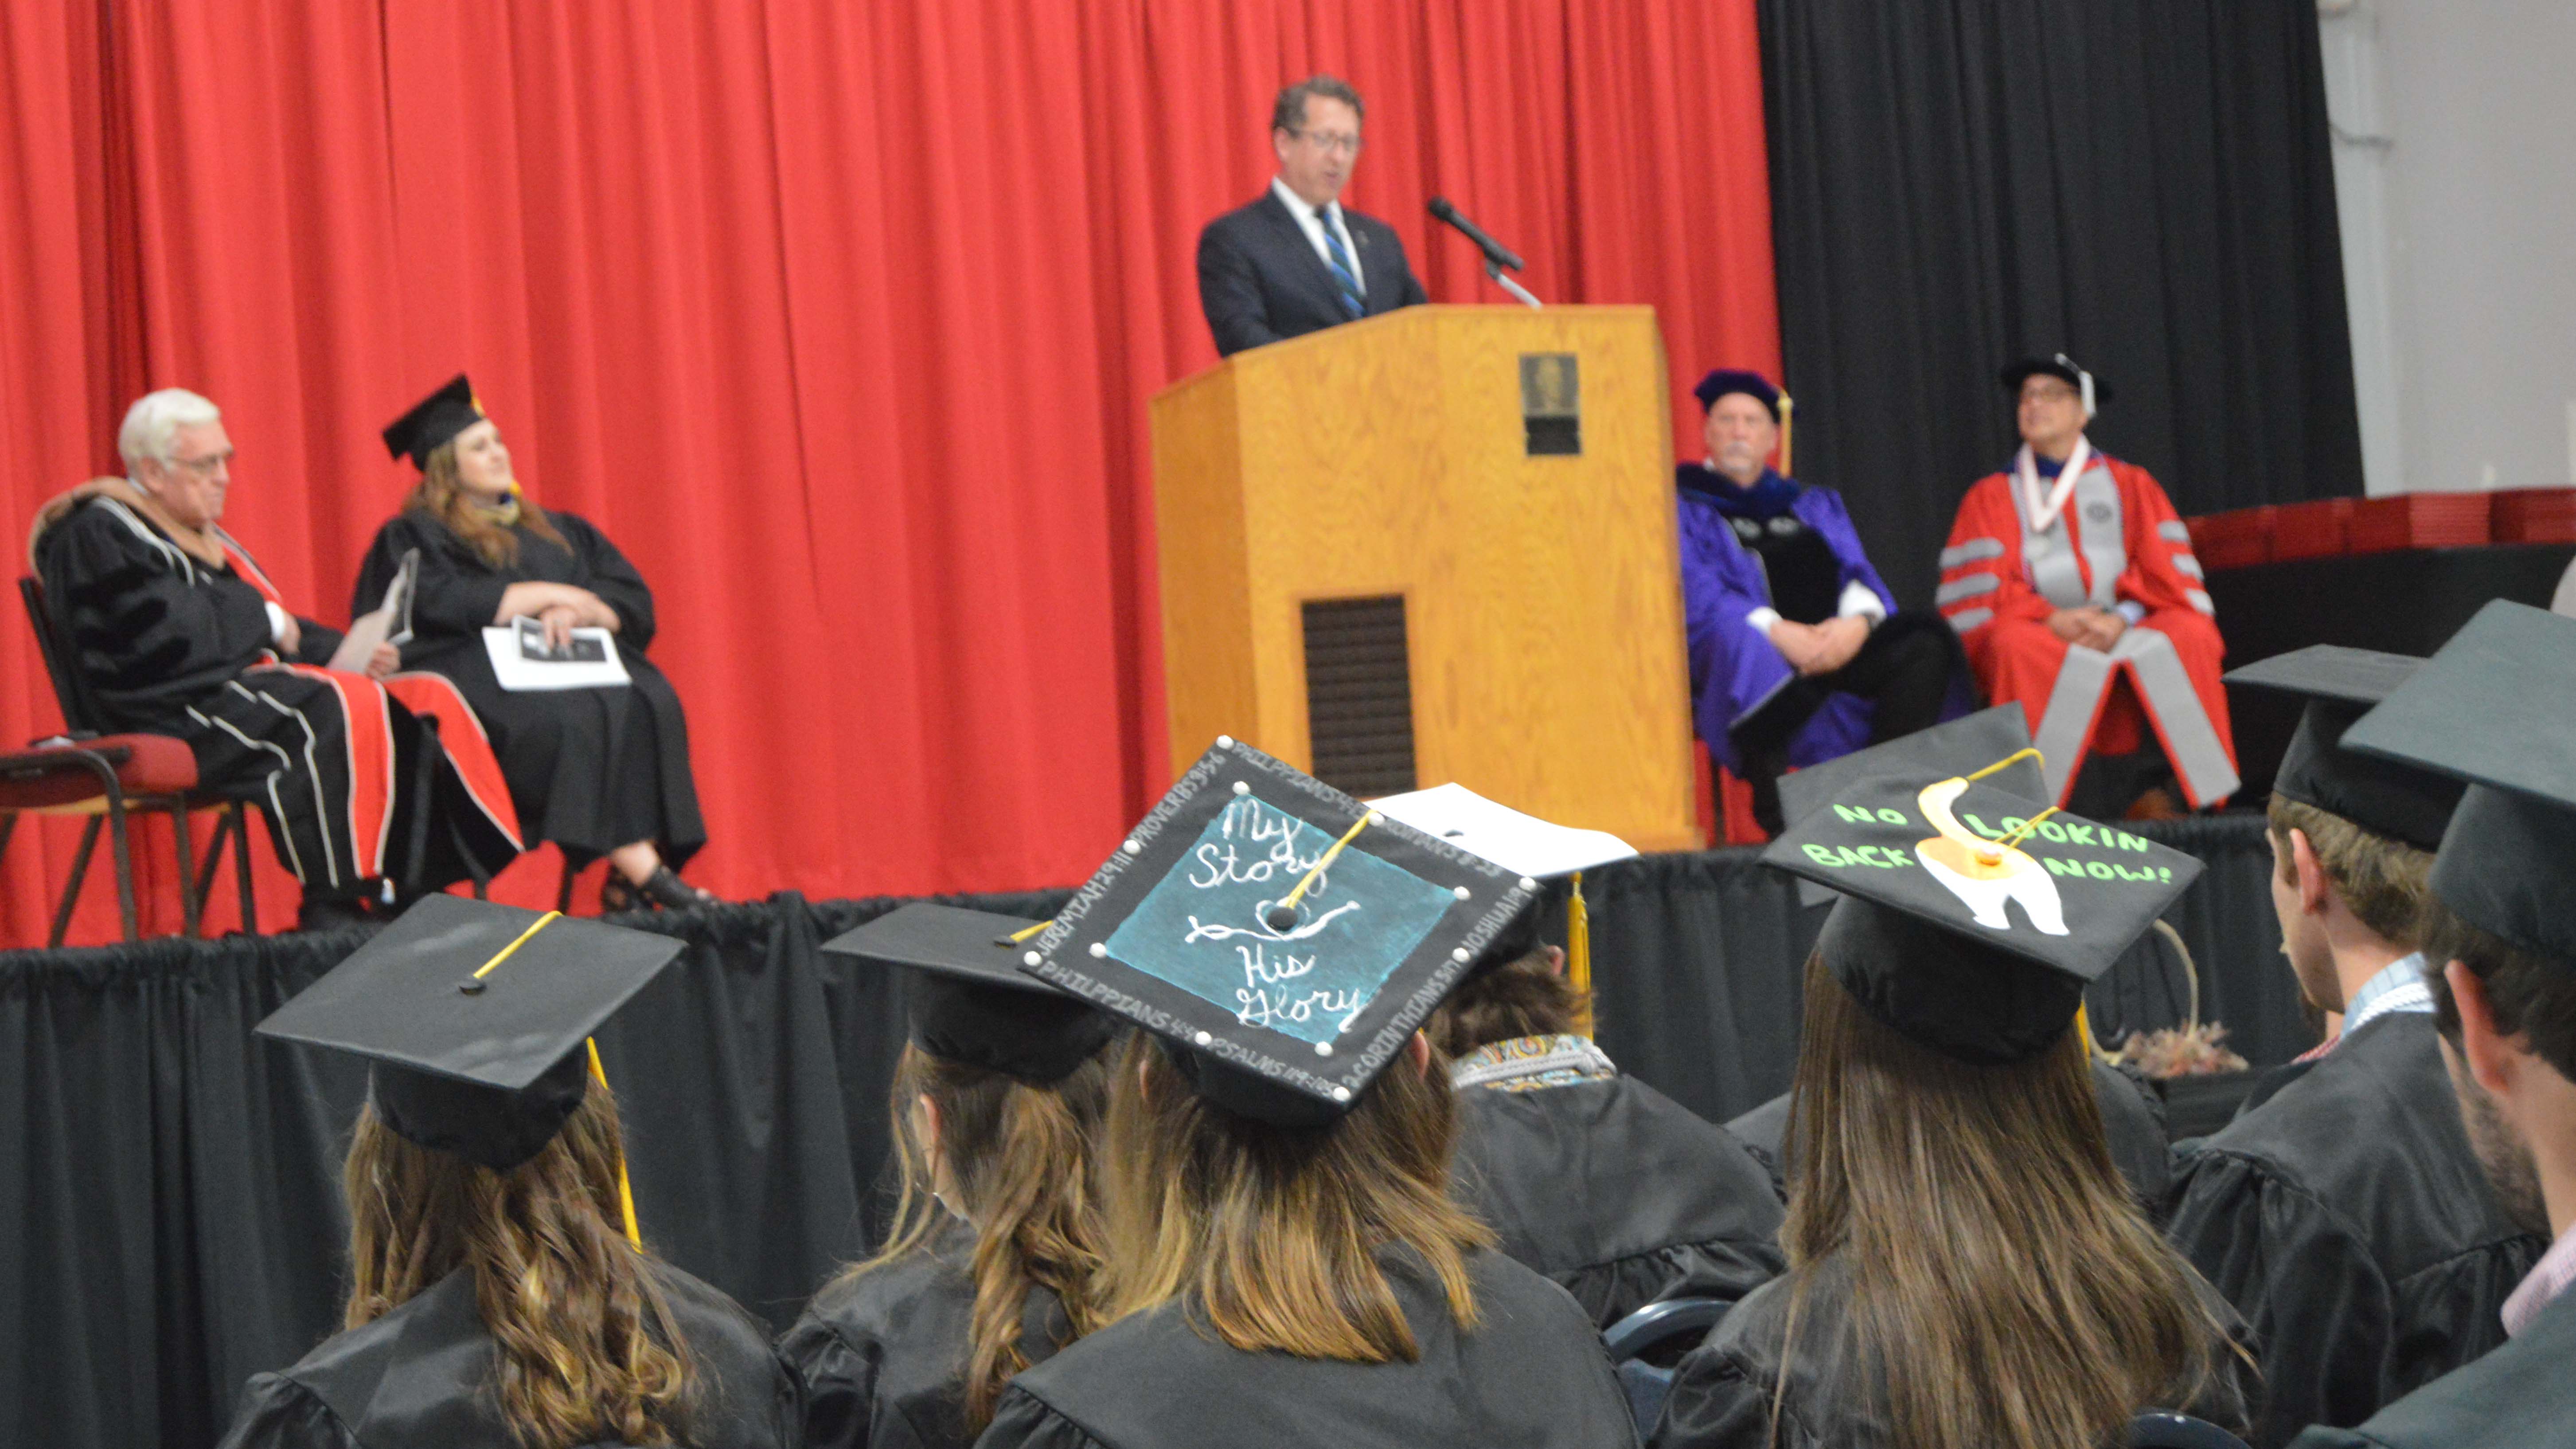 Congressman Adrian Smith delivered the 2022 Commencement Address at the Nebraska College of Technical Agriculture. From left, Bob Phares, Jennifer McConville, Larry Gossen and Mike Boehm. The top of a mortarboard says, “My Story. His Glory.” (Mary Crawford / NCTA News Photo)